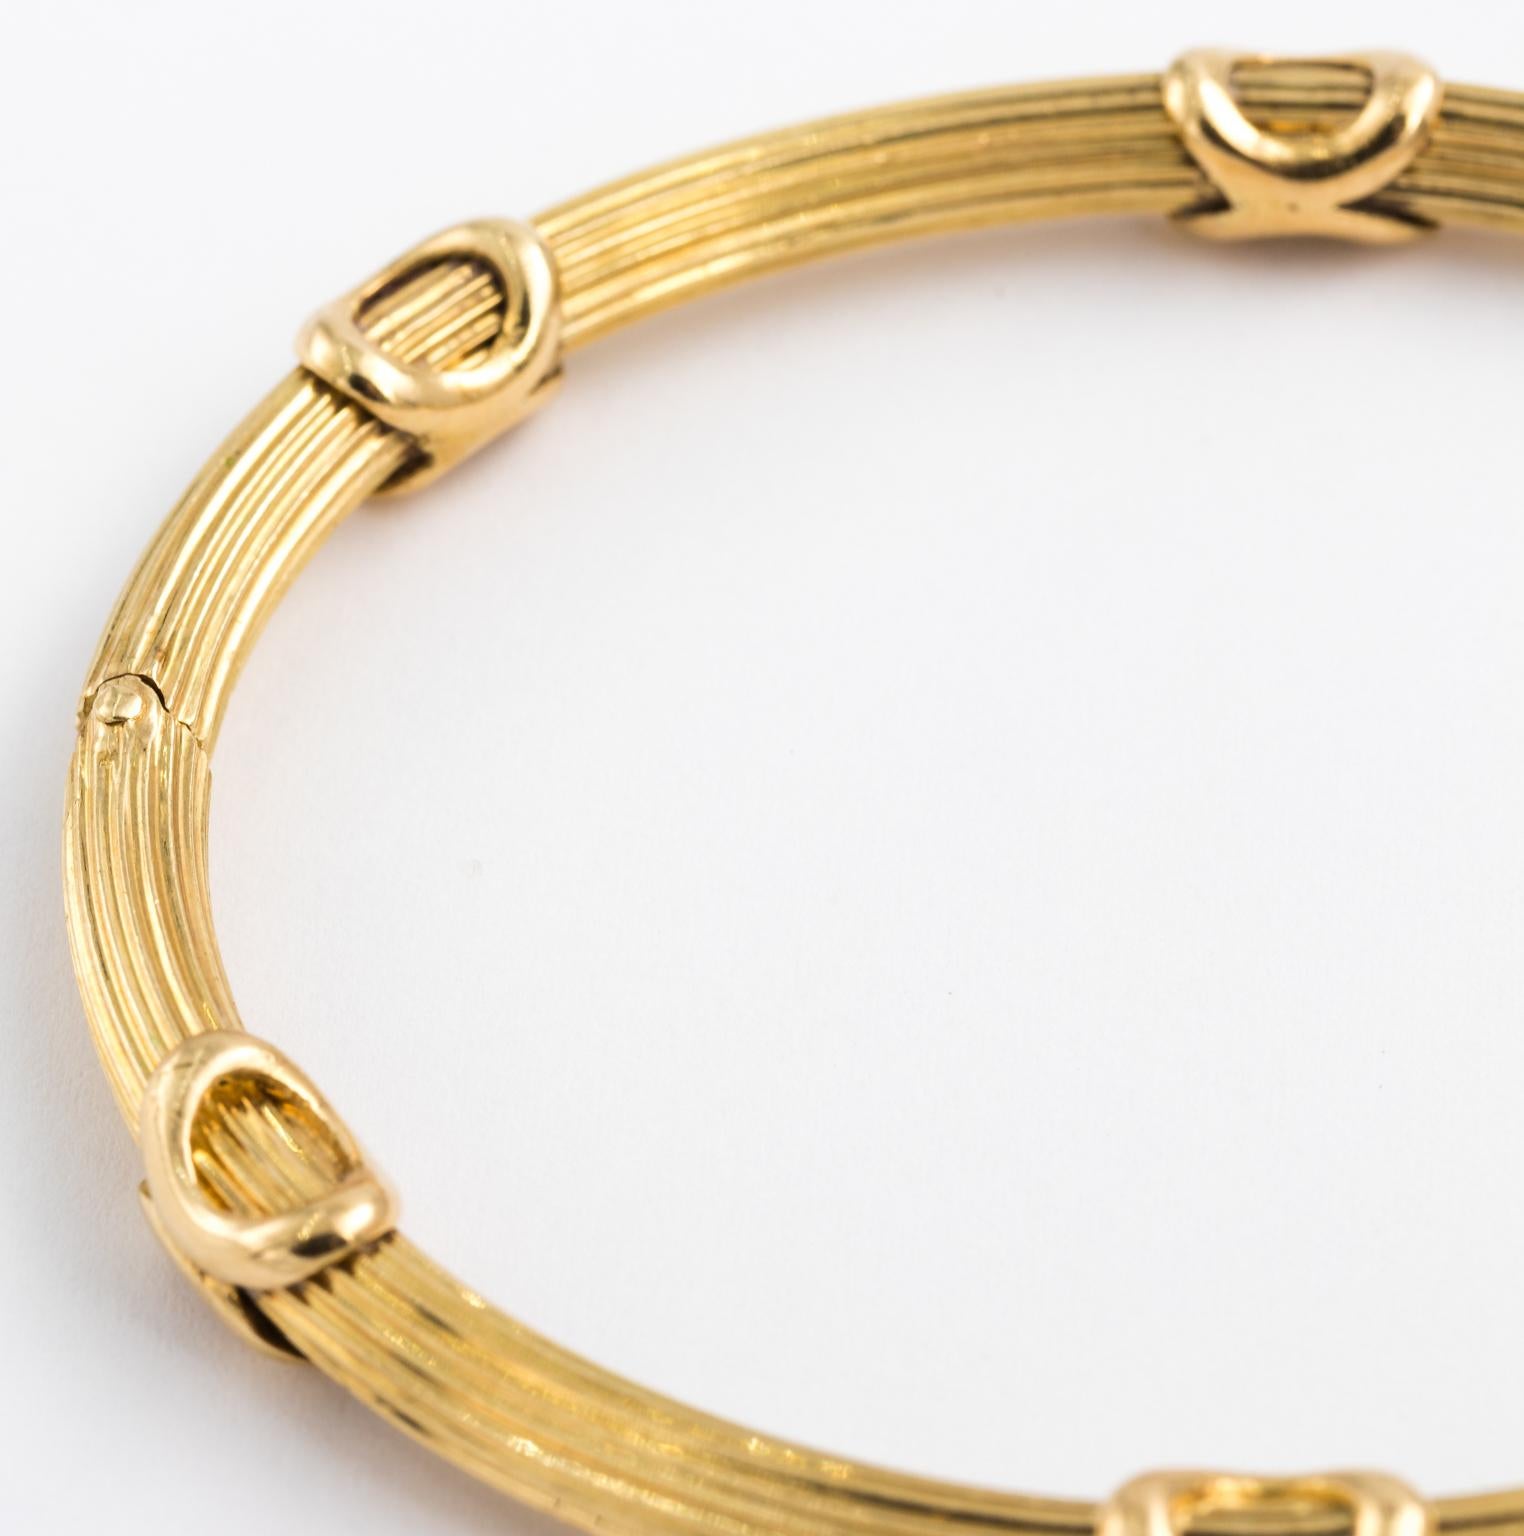 Circa mid-20th century French bangle hallmarked with 18 karat gold. Design is reeded with six x-shaped motifs. The bracelet also comes with safety clasp.
